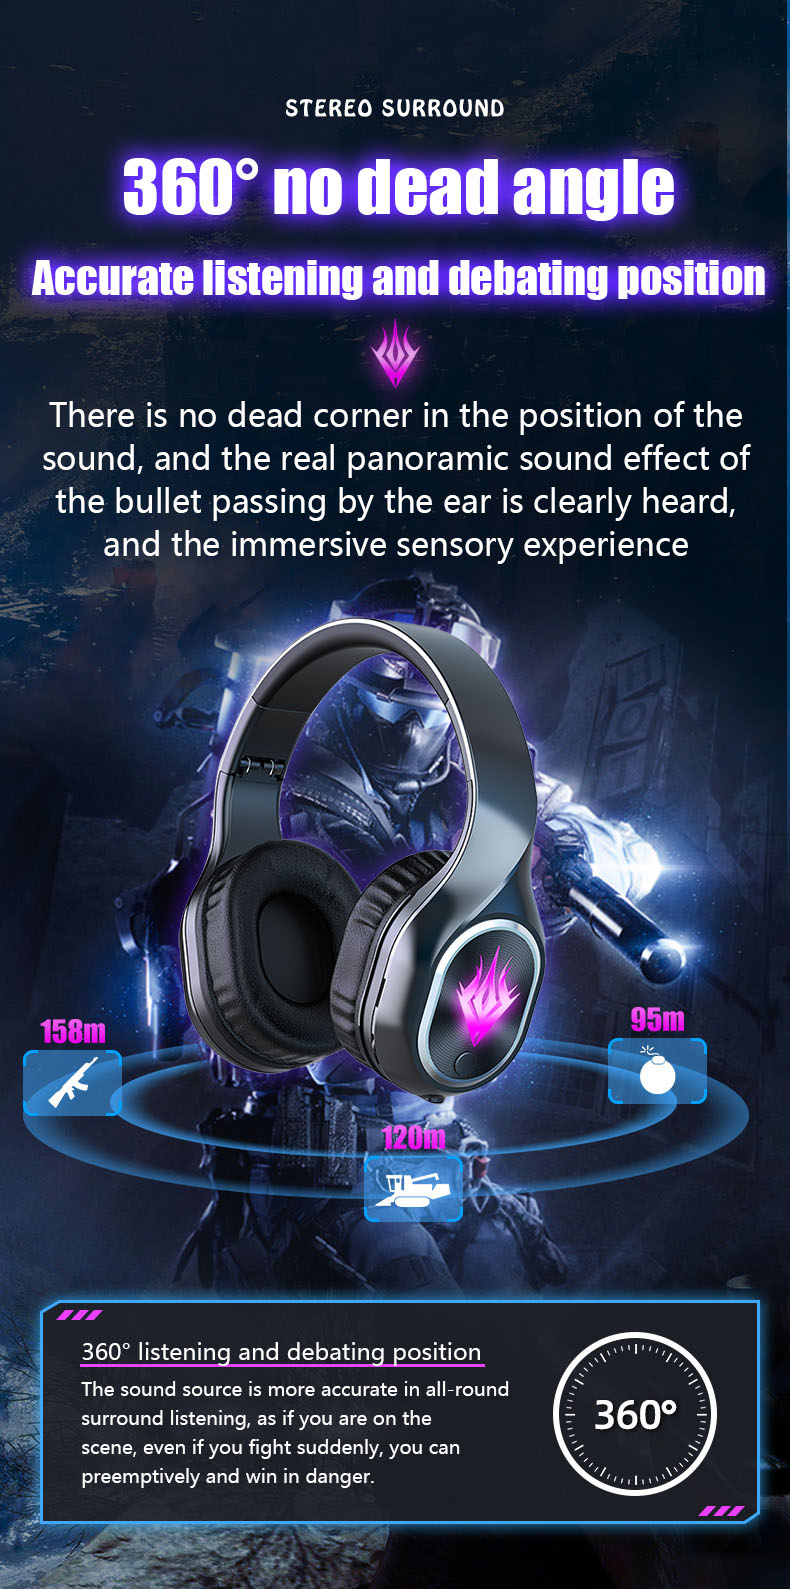 Bakeey-T2-bluetooth-52-Wireless-GameMusic-Mode-Foldable-Gaming-Headphone-RGB-Magic-Lights-3D-Stereo--1905920-5